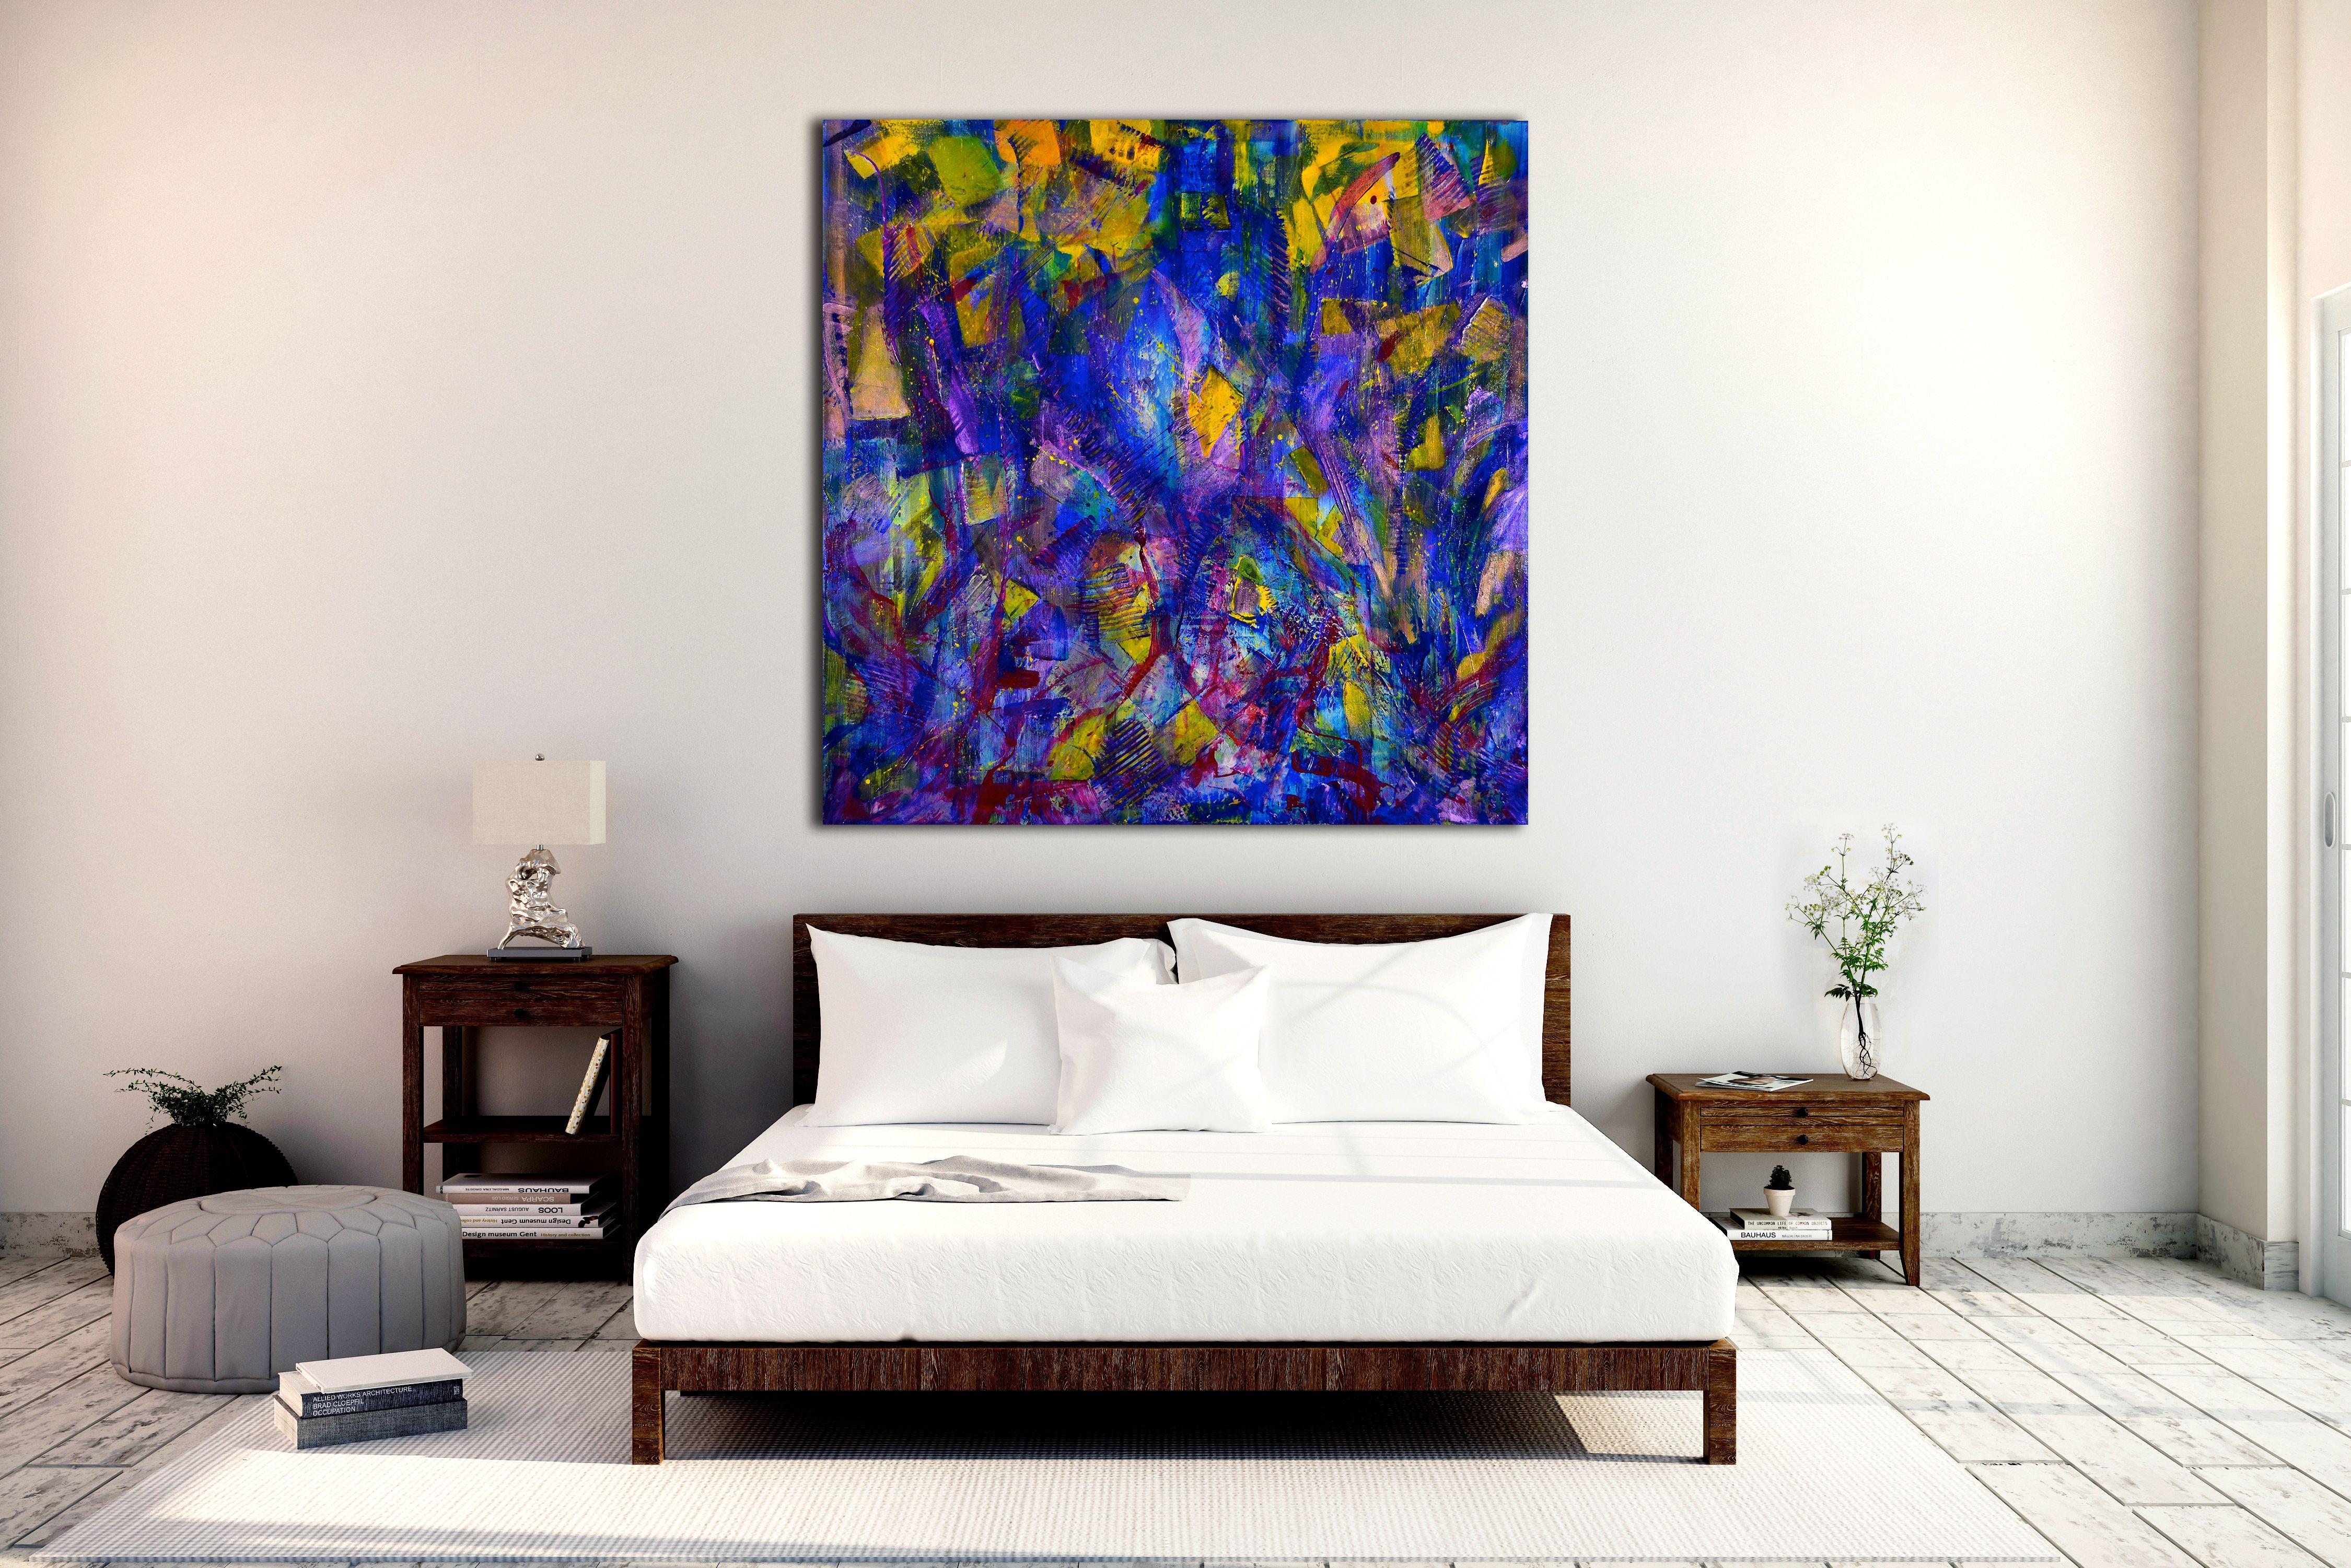 - READY TO HANG    - SIGNED CANVAS    - SIGNED CERTIFICATE OF AUTHENTICITY    - BOLD STATEMENT PIECE    Detailed brush strokes combines with gestural and organic shapes. Iridescent mediums were apply creating a vibrant piece with an electric feel.